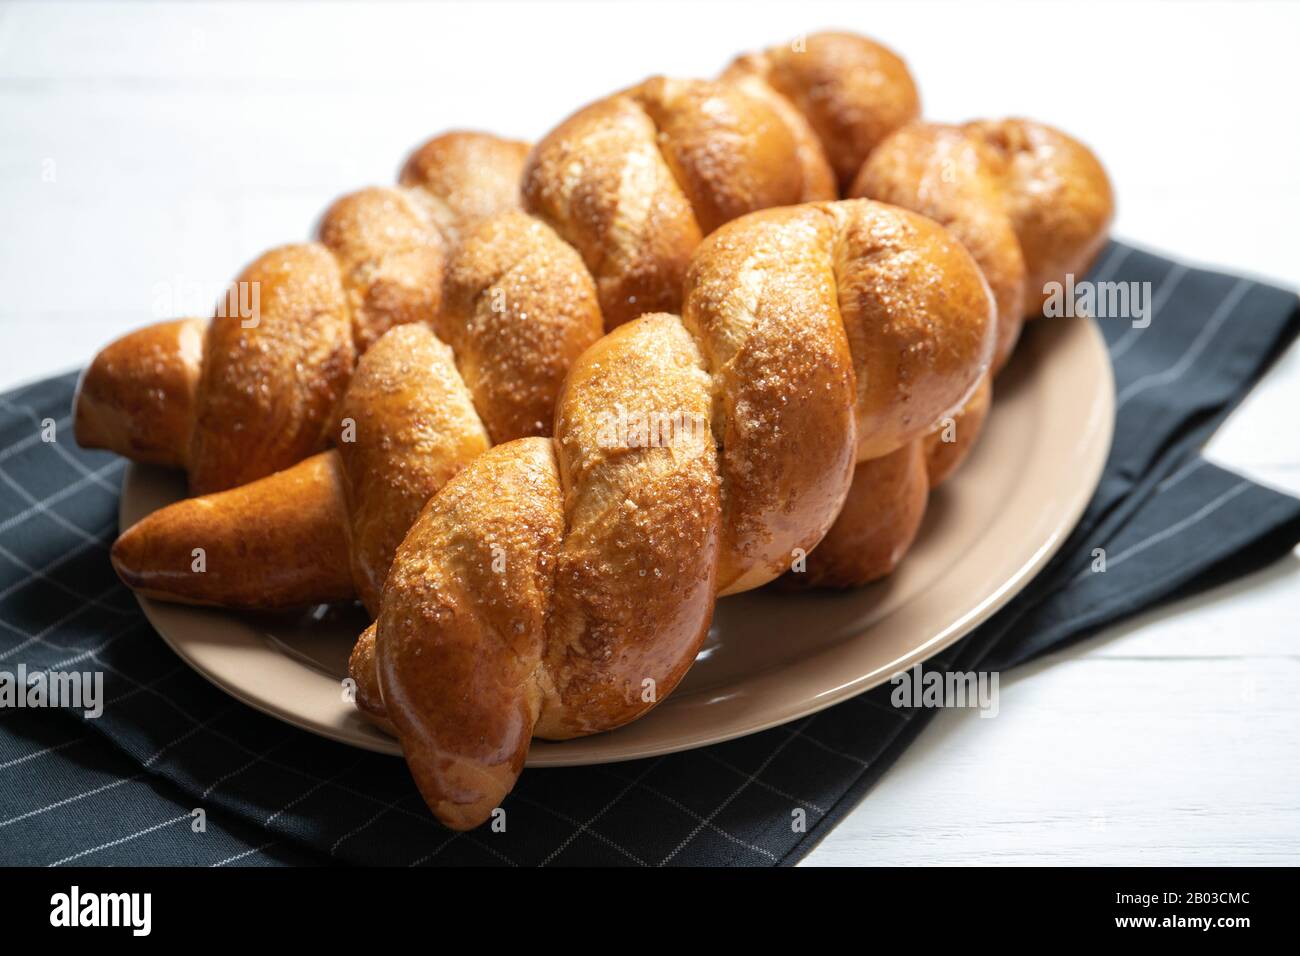 Delicious pastries.Tasty buns.Delicious Pigtail Buns.Close-up Stock Photo